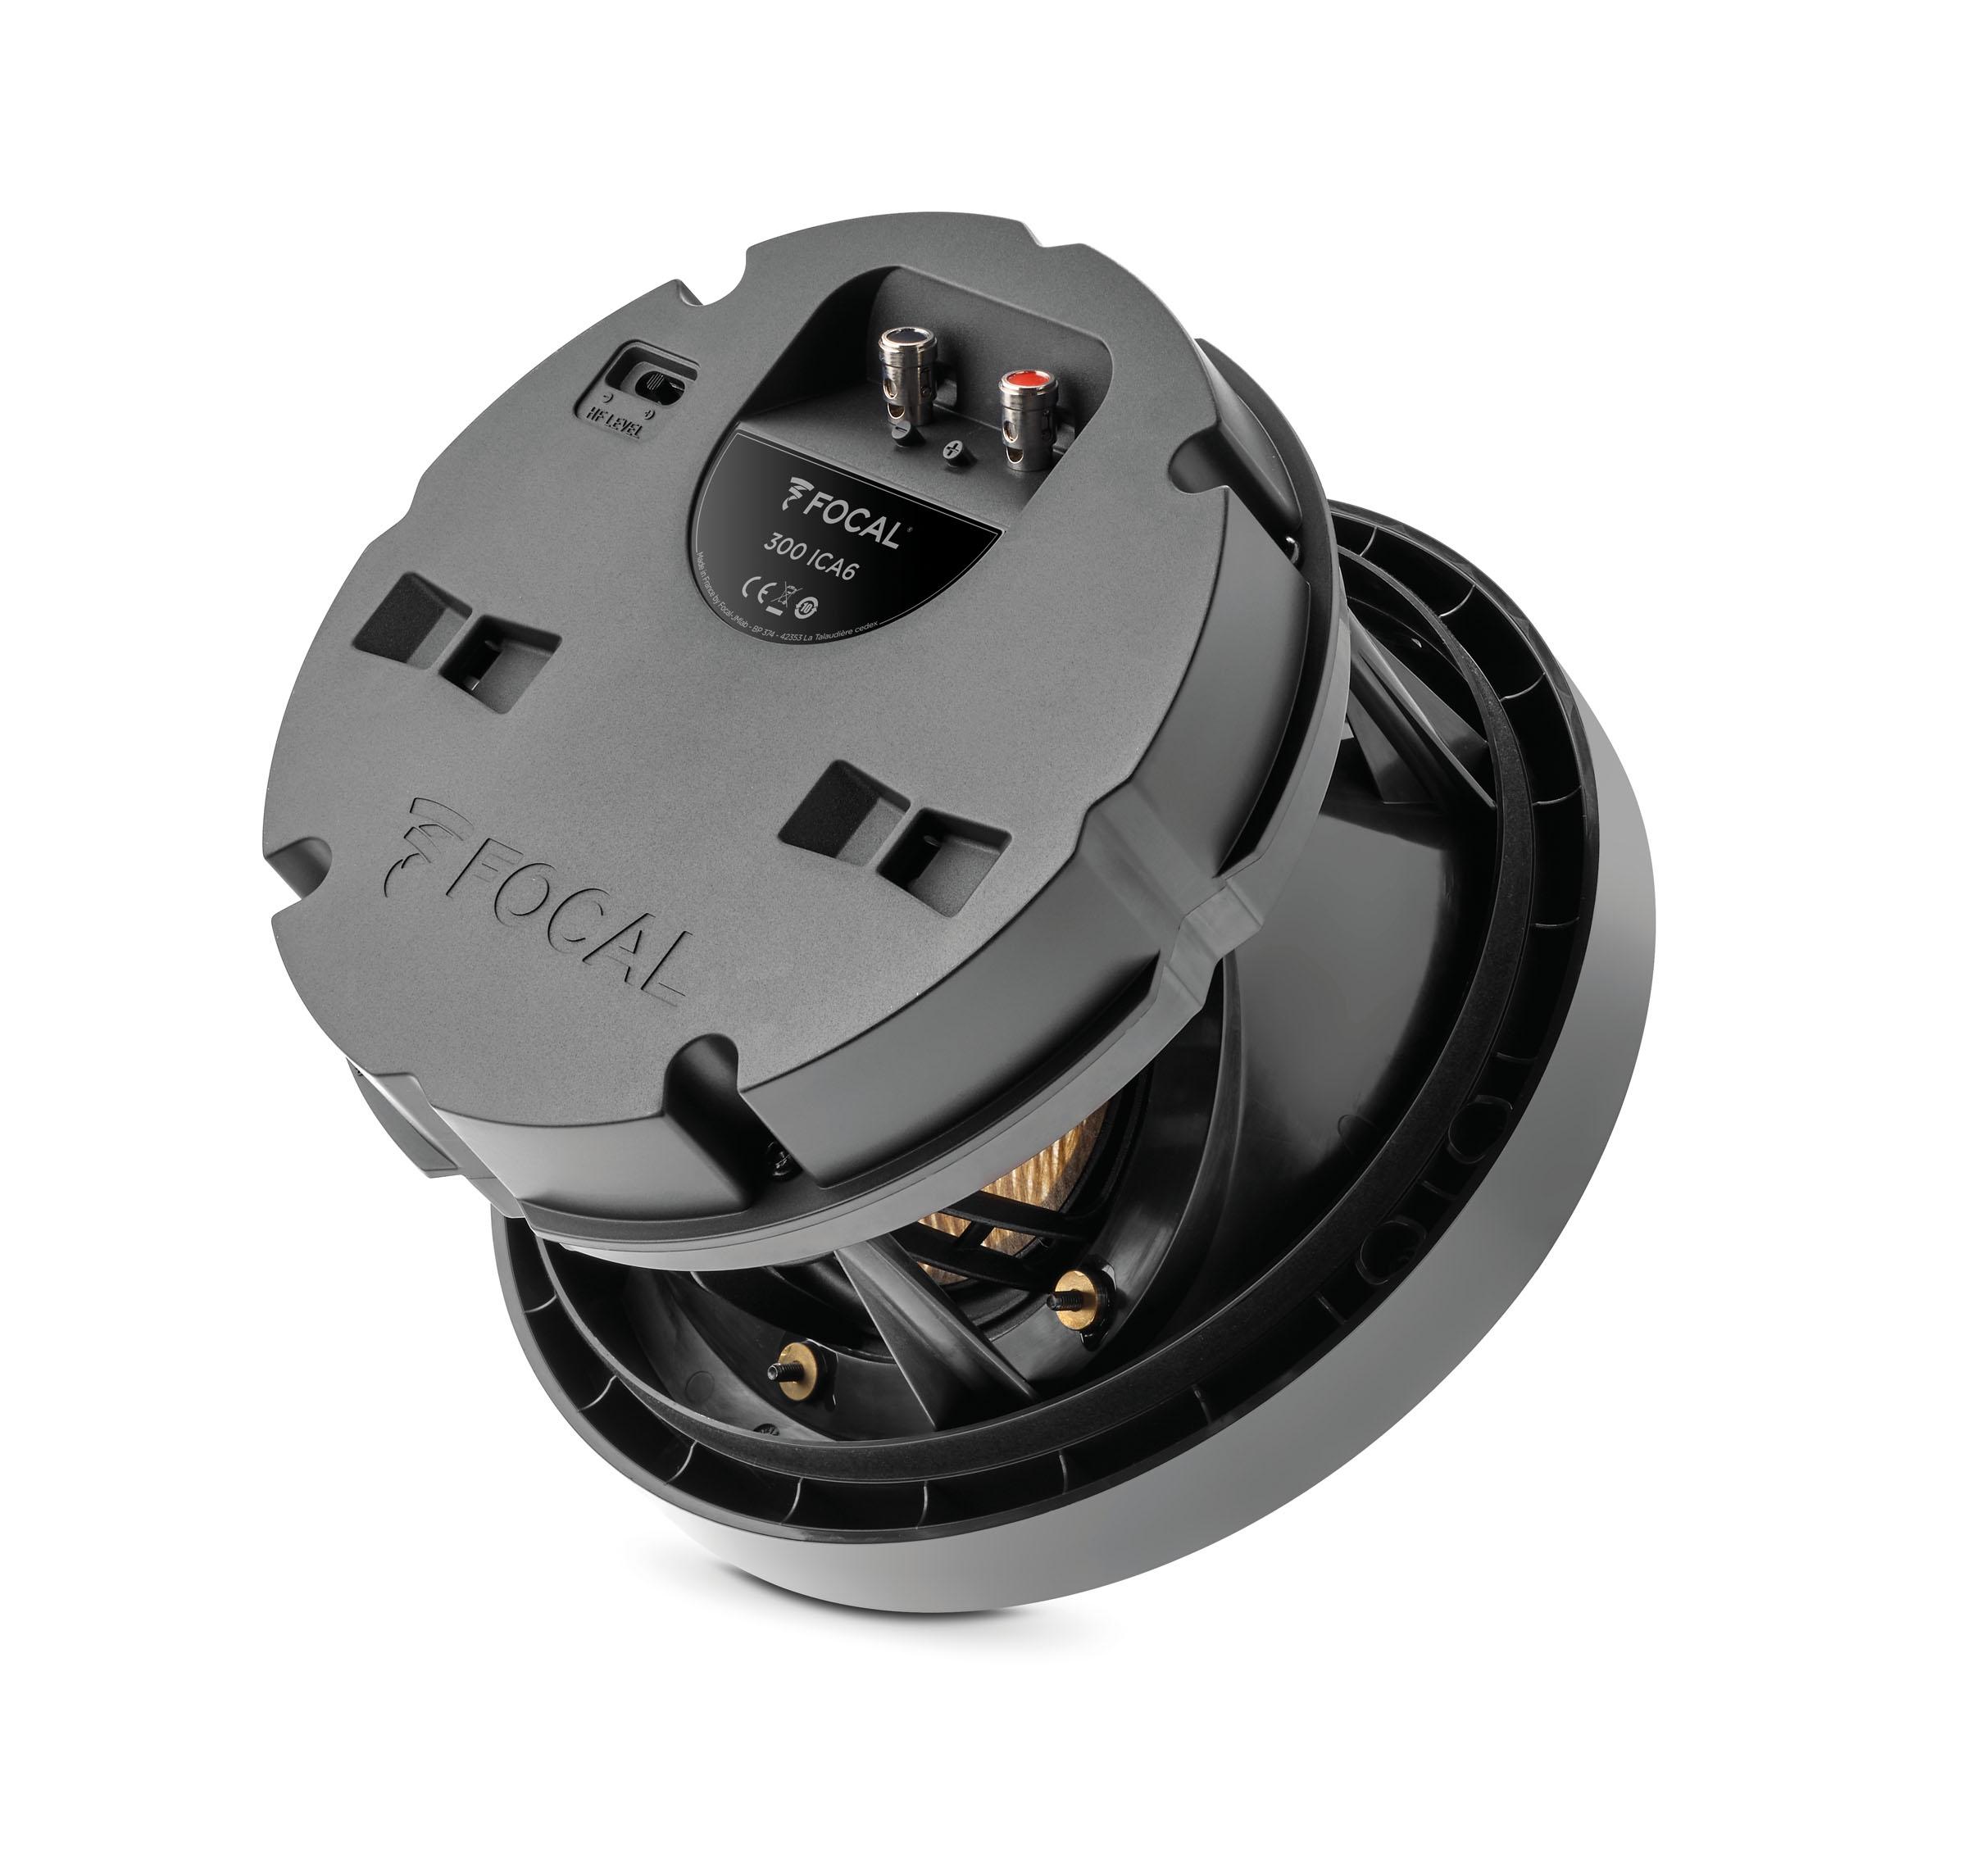 The latest in-ceiling from Focal has the perfect angle to immerse you in 3D sound c786d534 300 ica6 34 dos